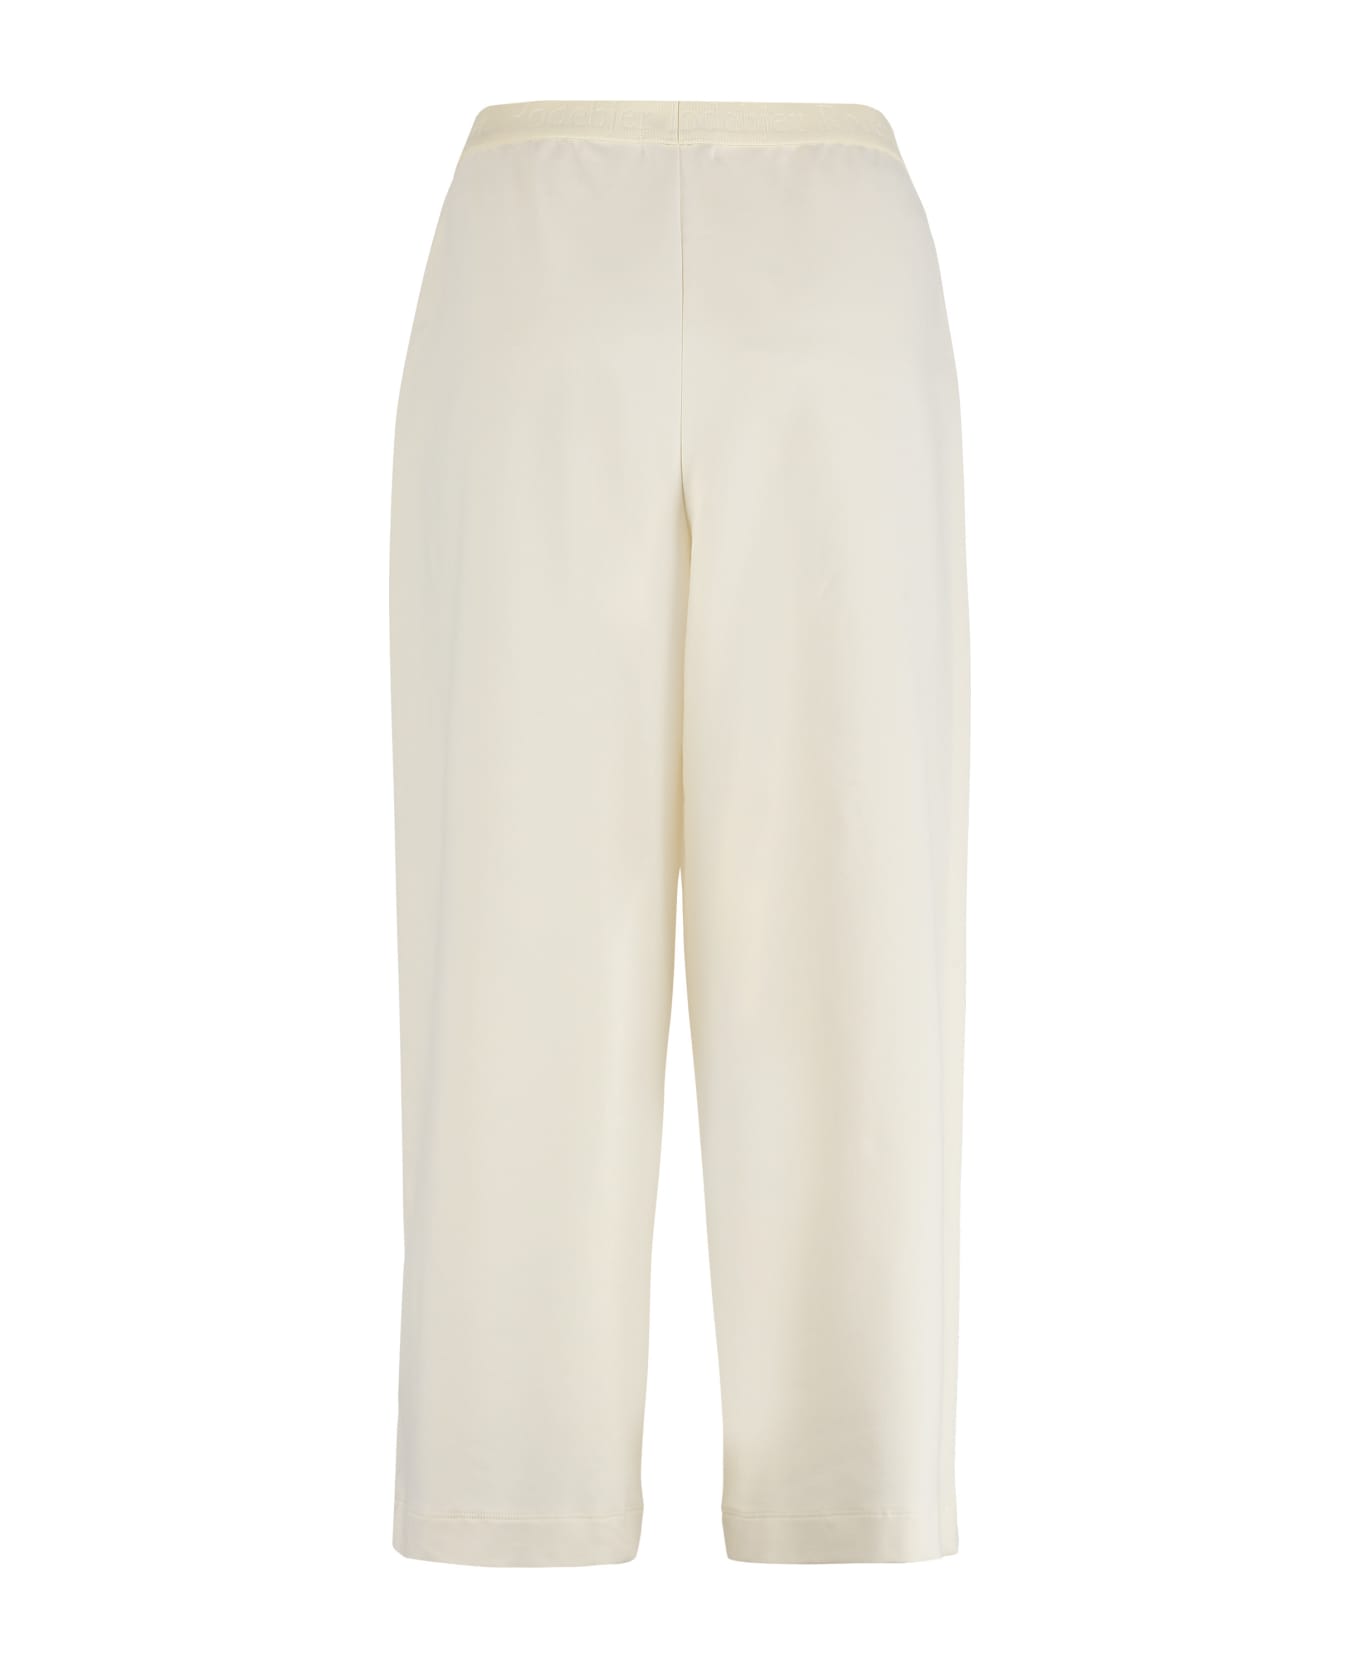 Rodebjer Roma Wide Leg Trousers - panna